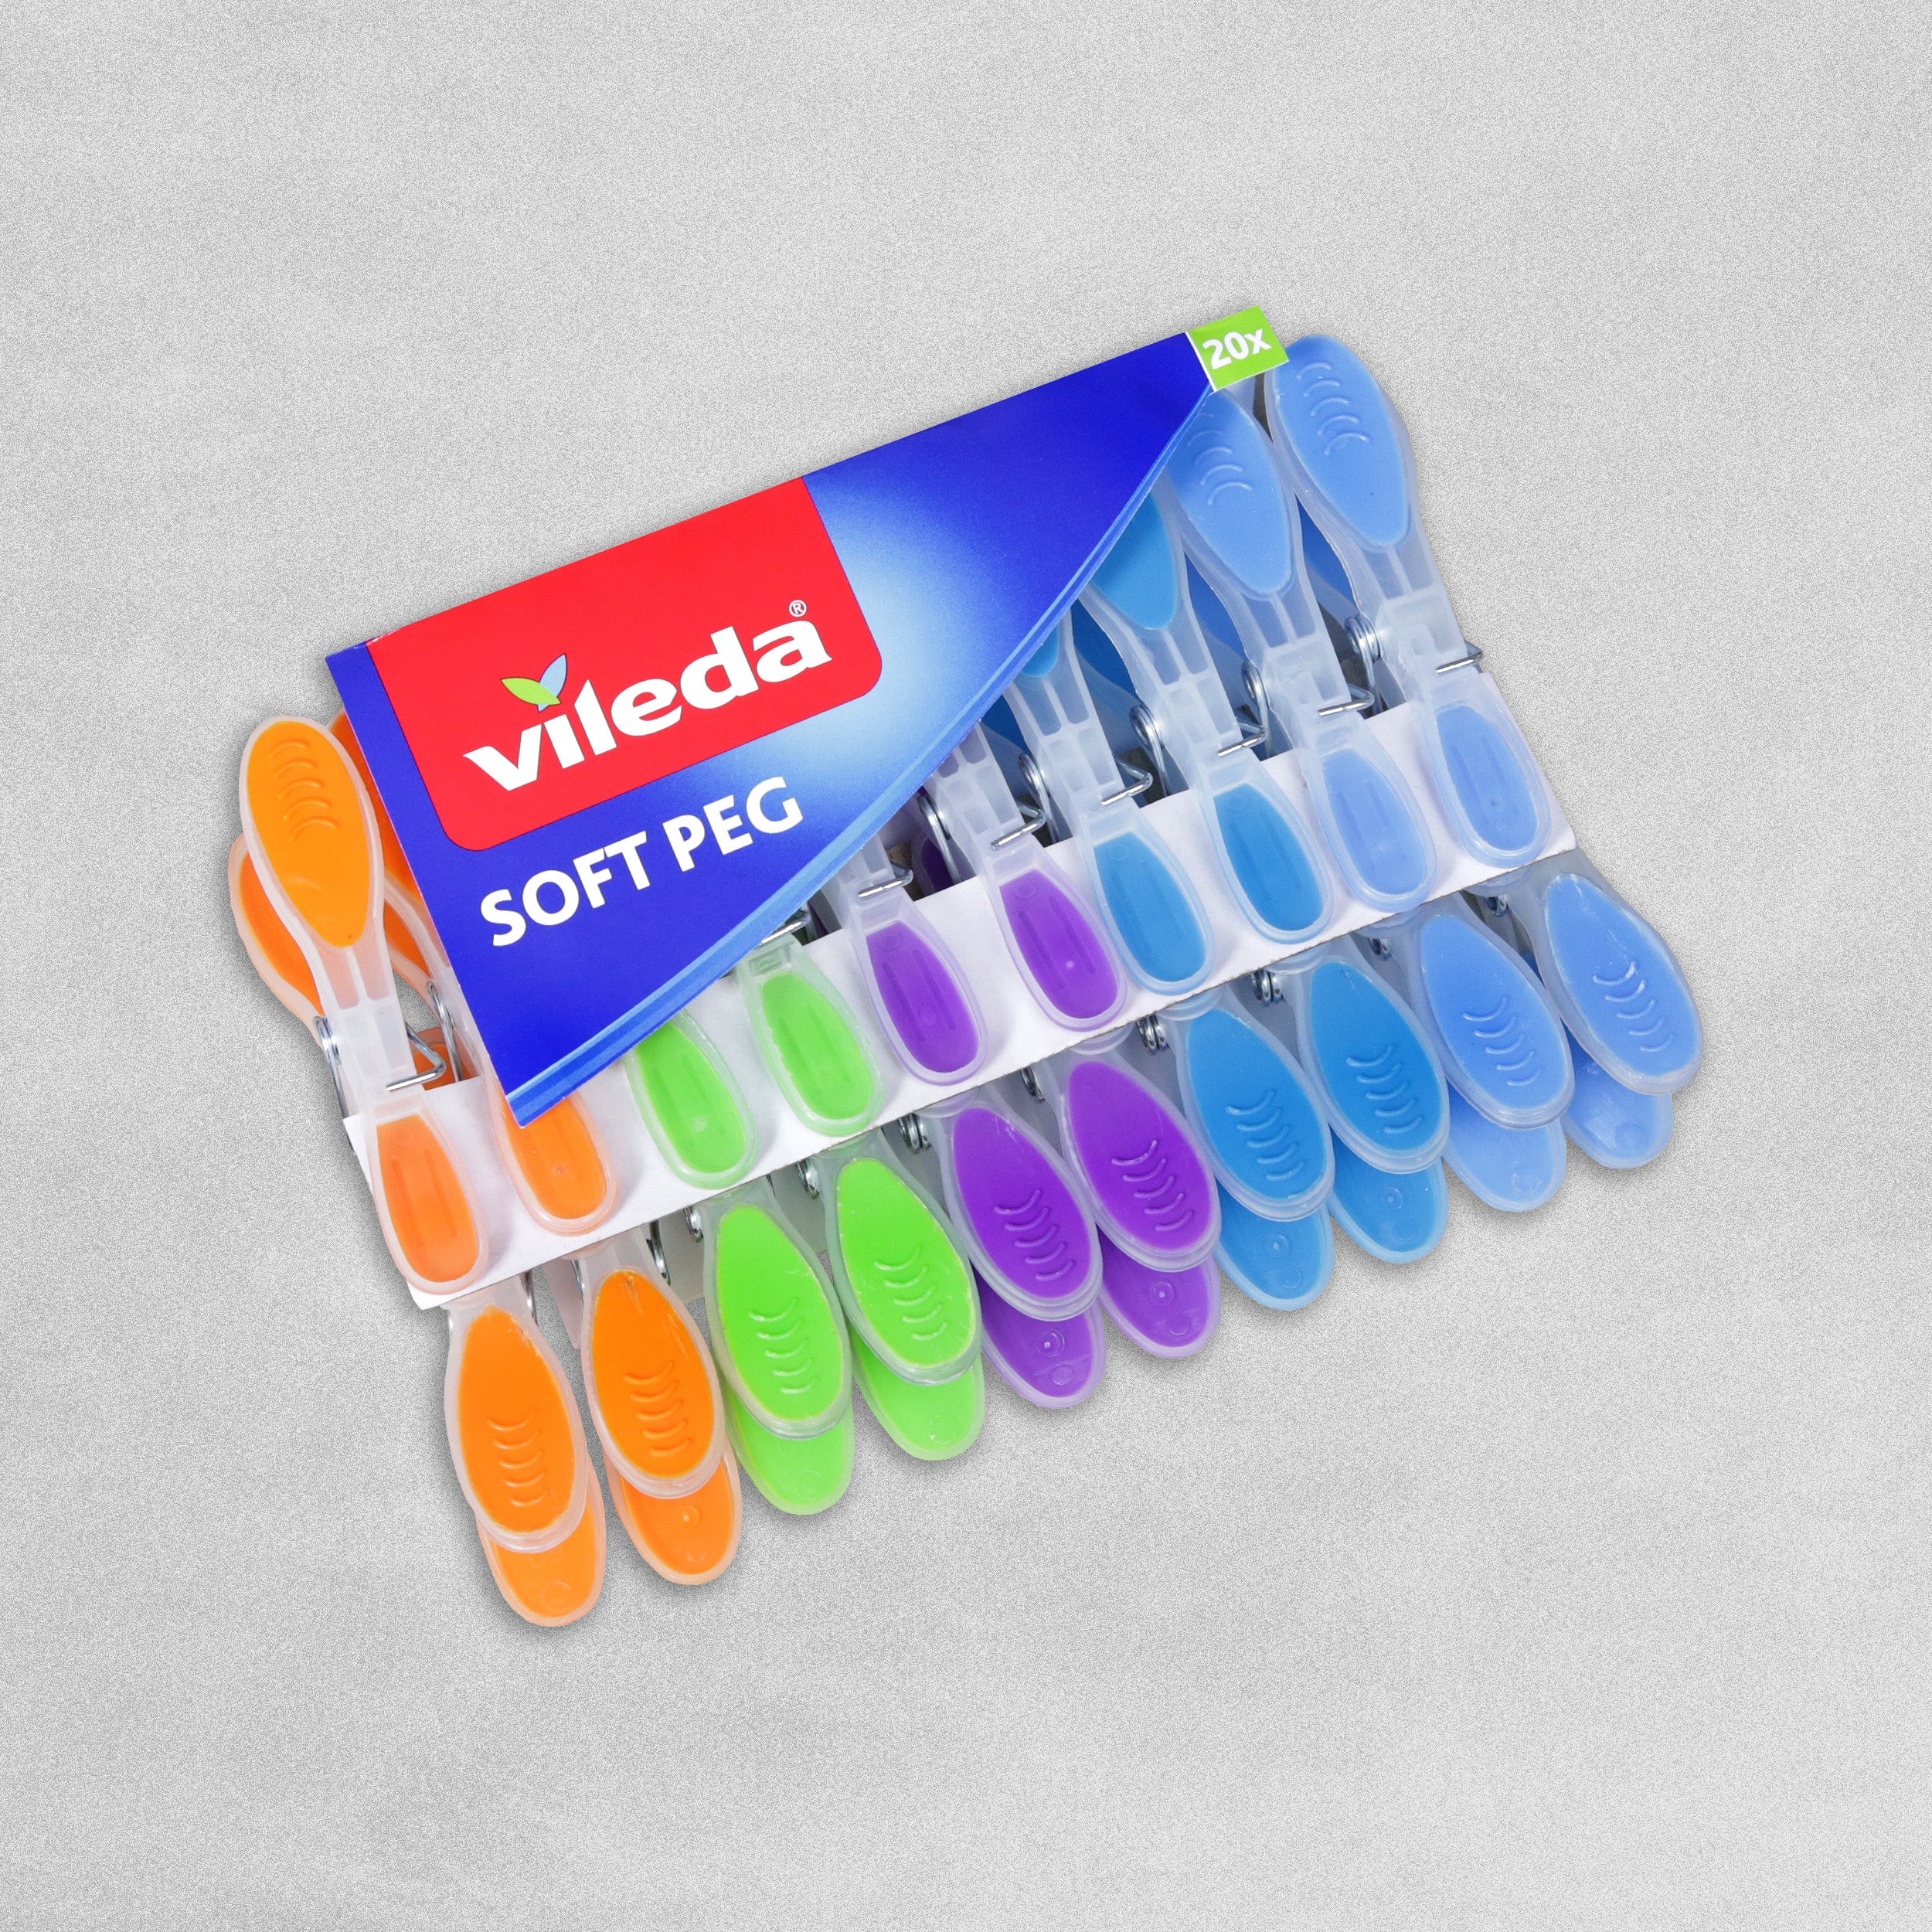 Vileda Soft Clothes Pegs - Pack of 20